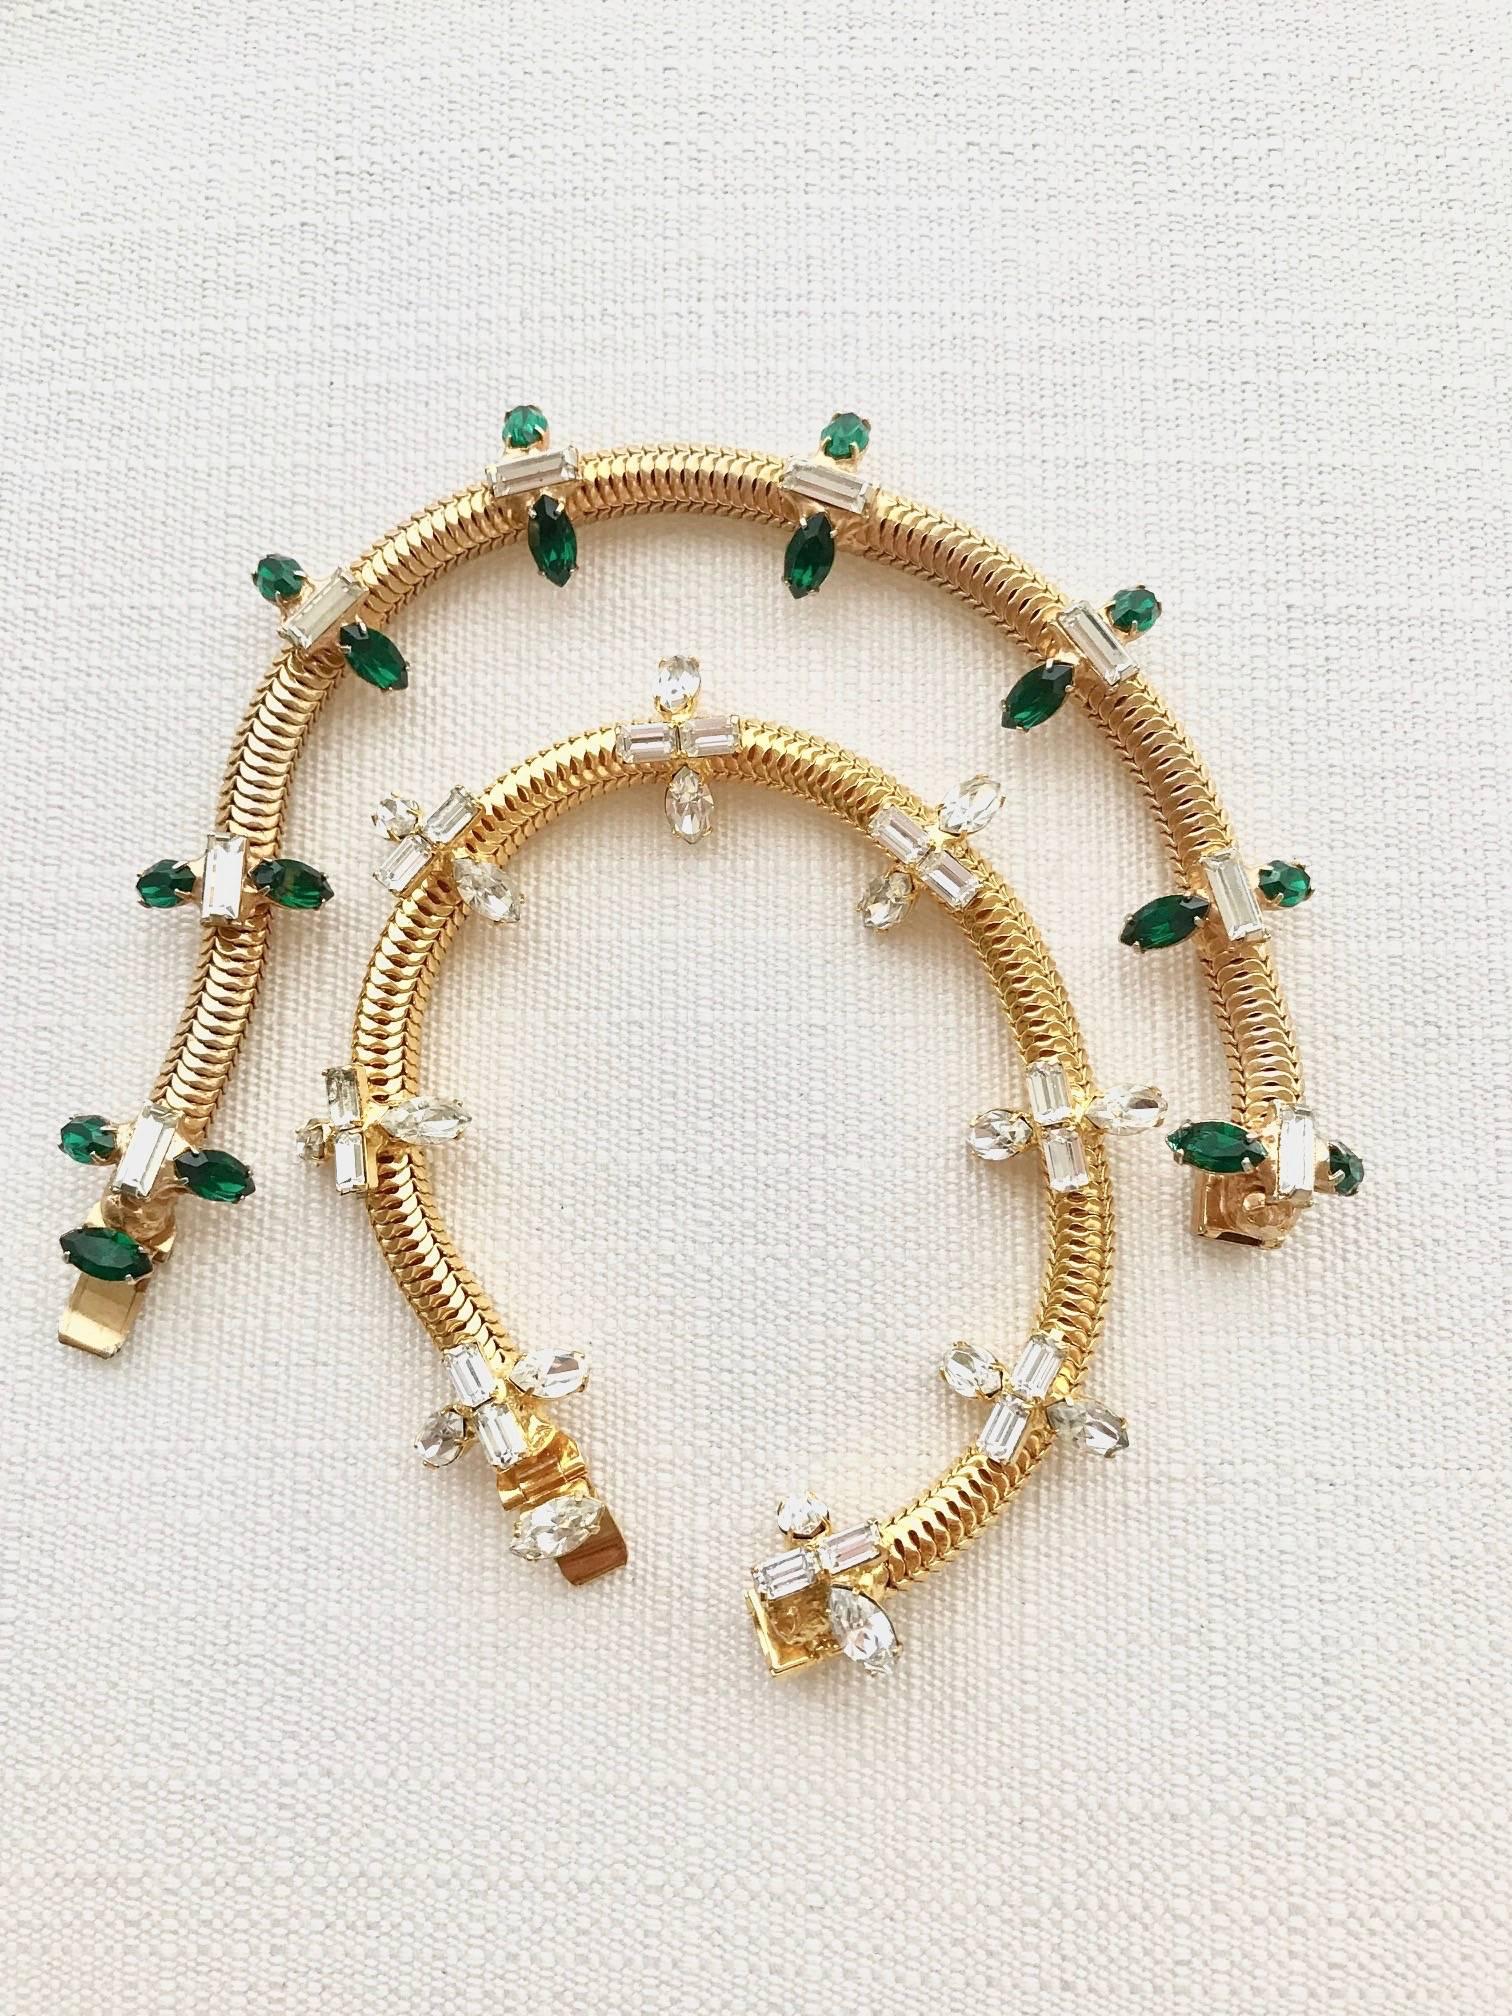 Beautiful 1960s William De Lillo 2 Sets of Rhinestones Bracelet in green and clear rhinestones. Bracelet in Excellent condition.